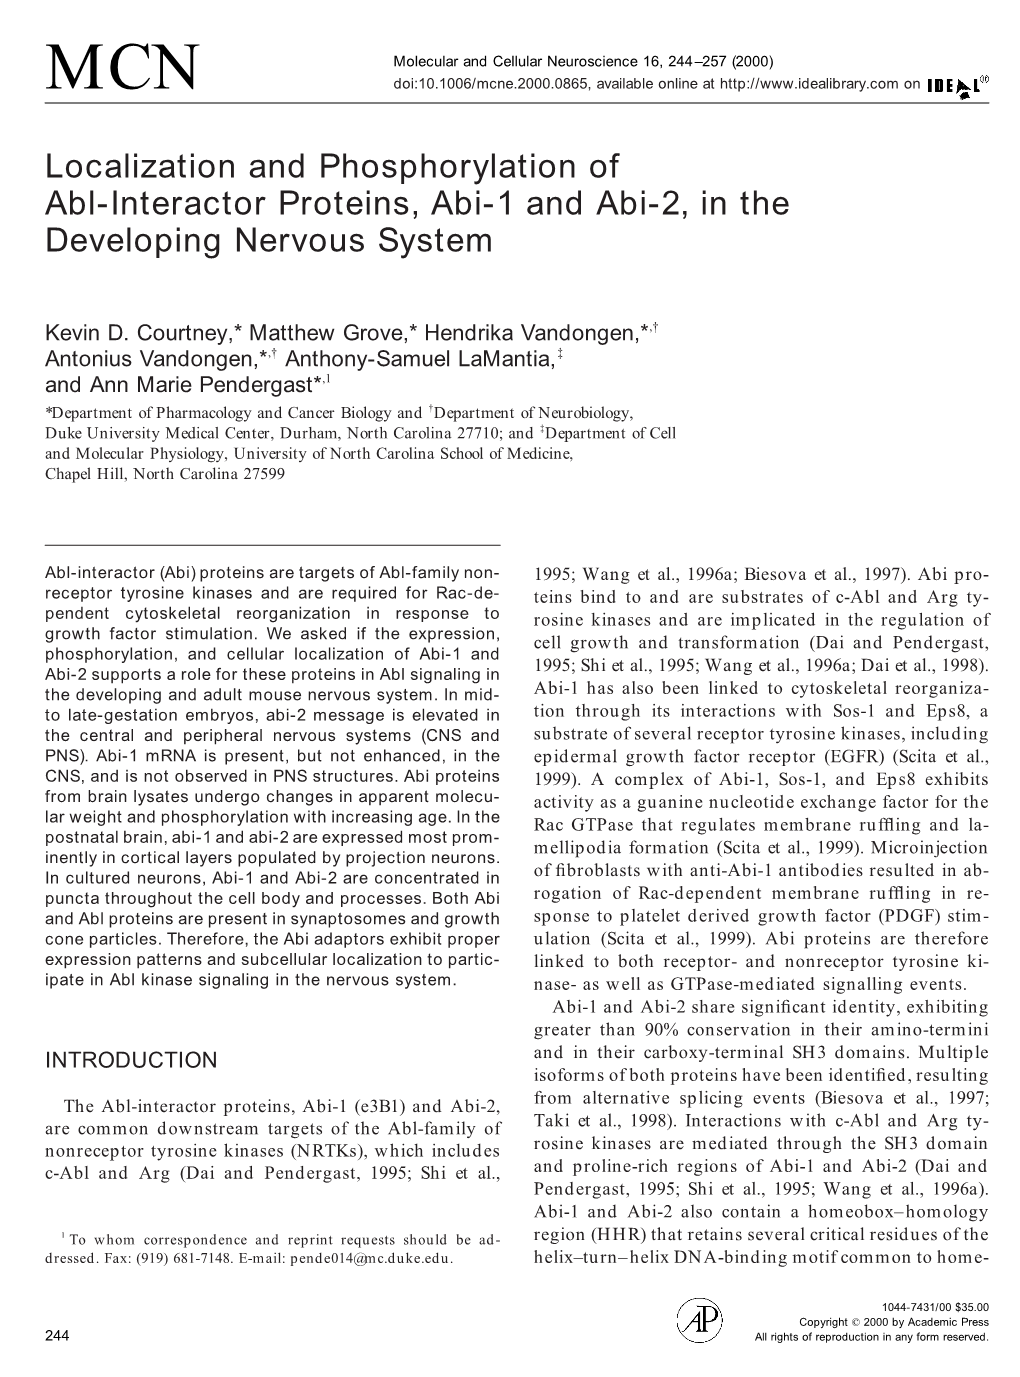 Localization and Phosphorylation of Abl-Interactor Proteins, Abi-1 and Abi-2, in the Developing Nervous System